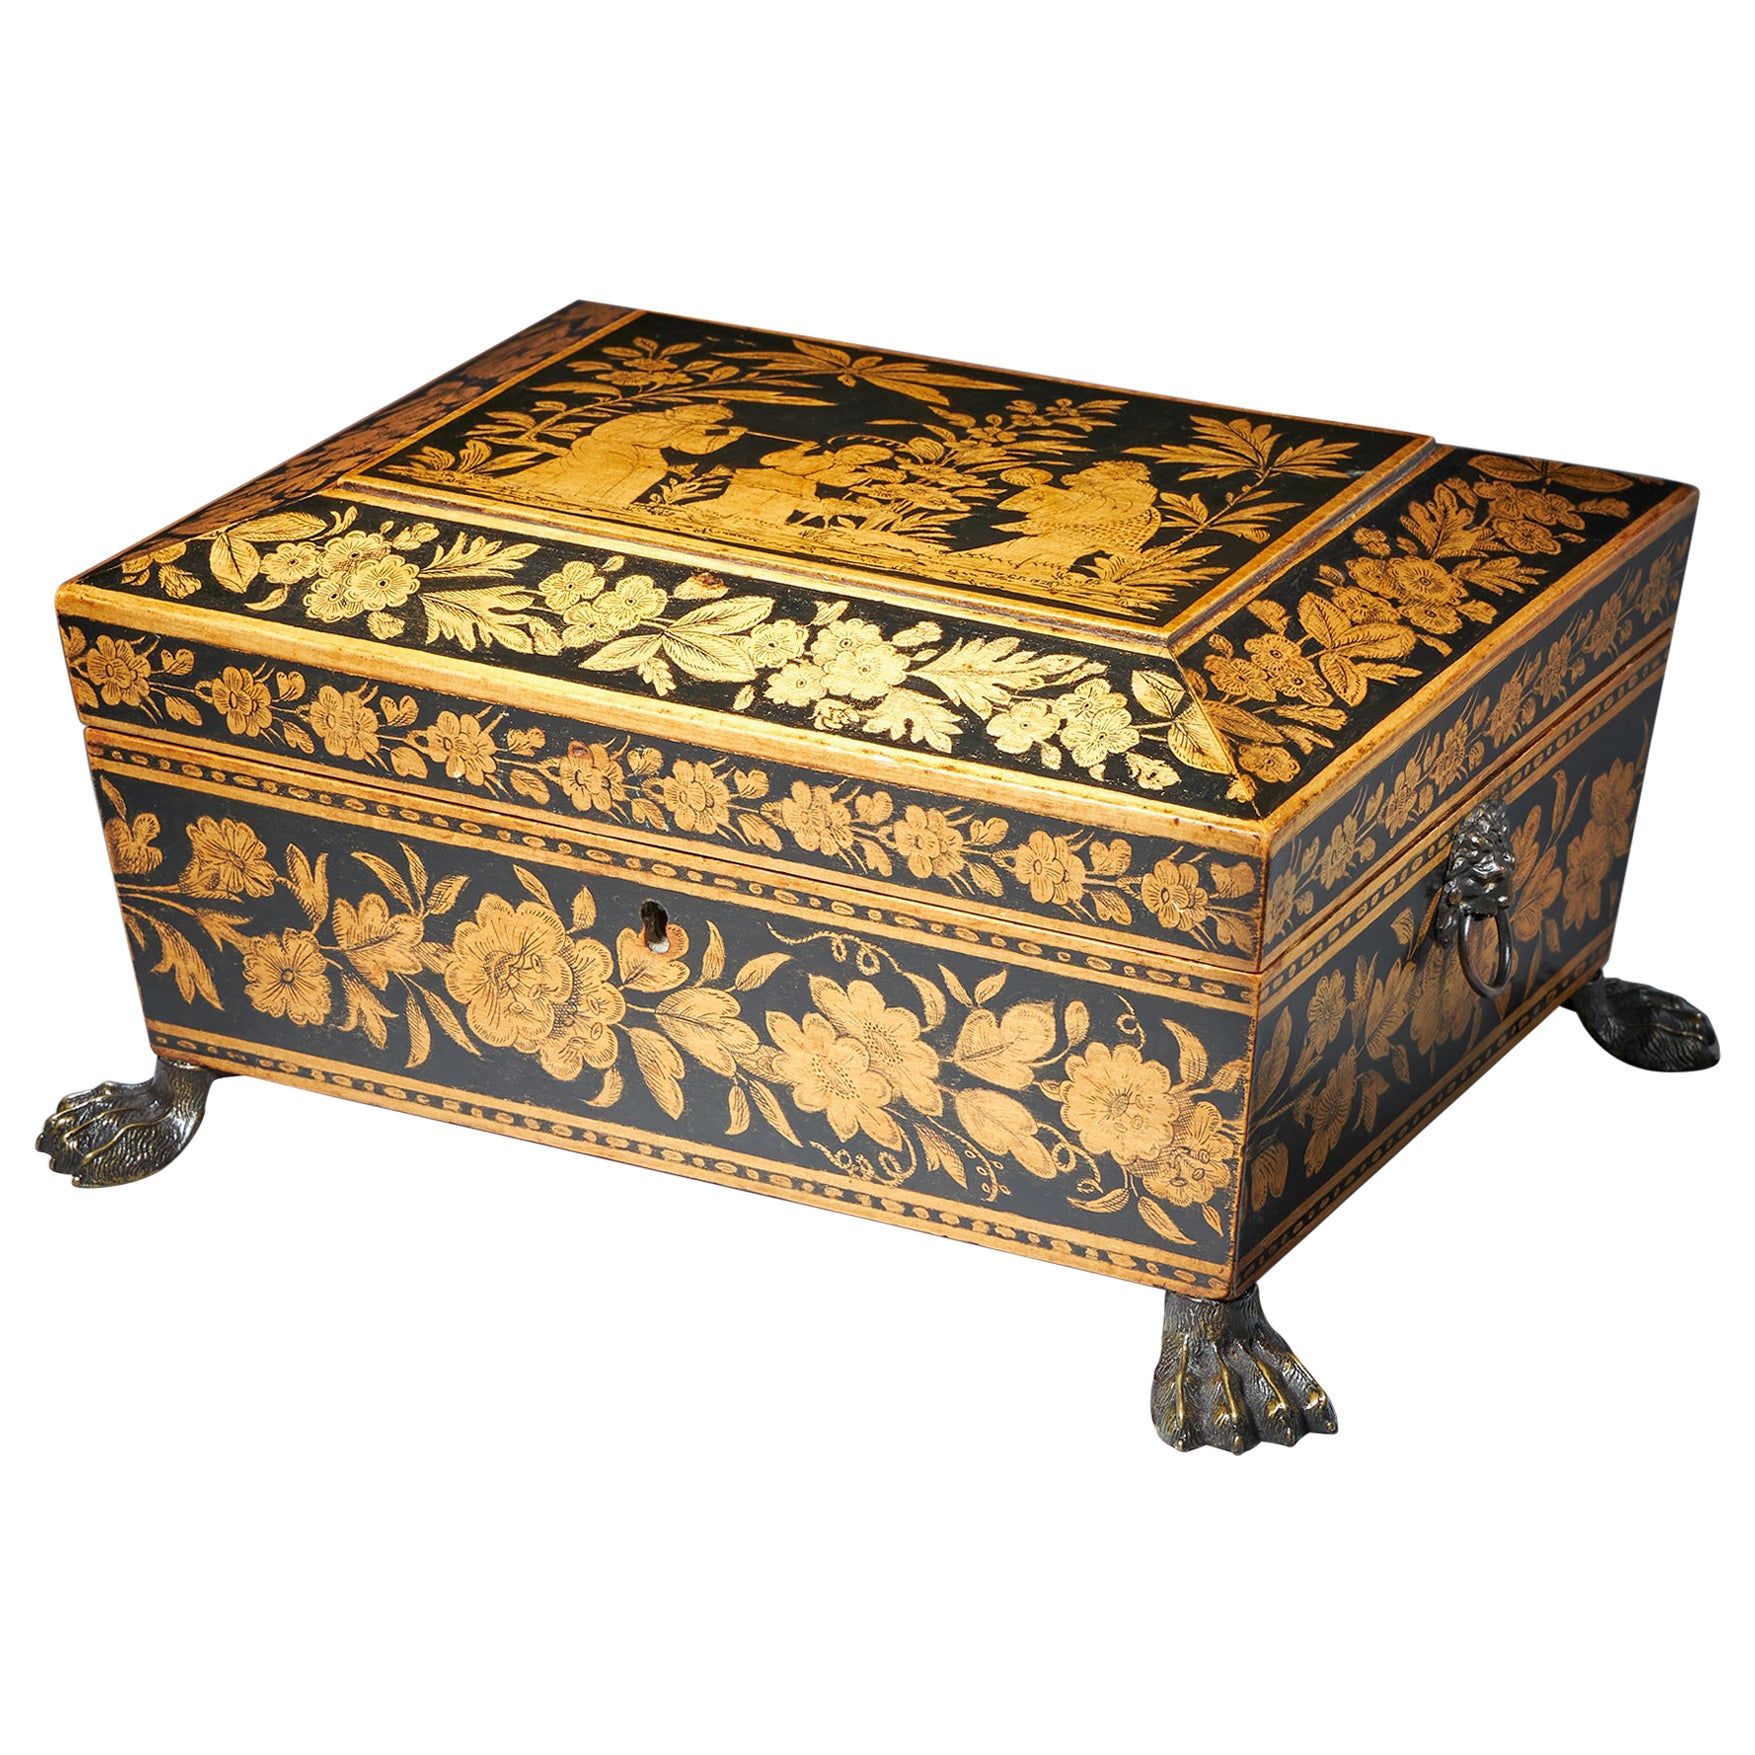 George III Chinoiserie Brass Mounted Penwork Jewellery Box, Signed E.F 1816 For Sale